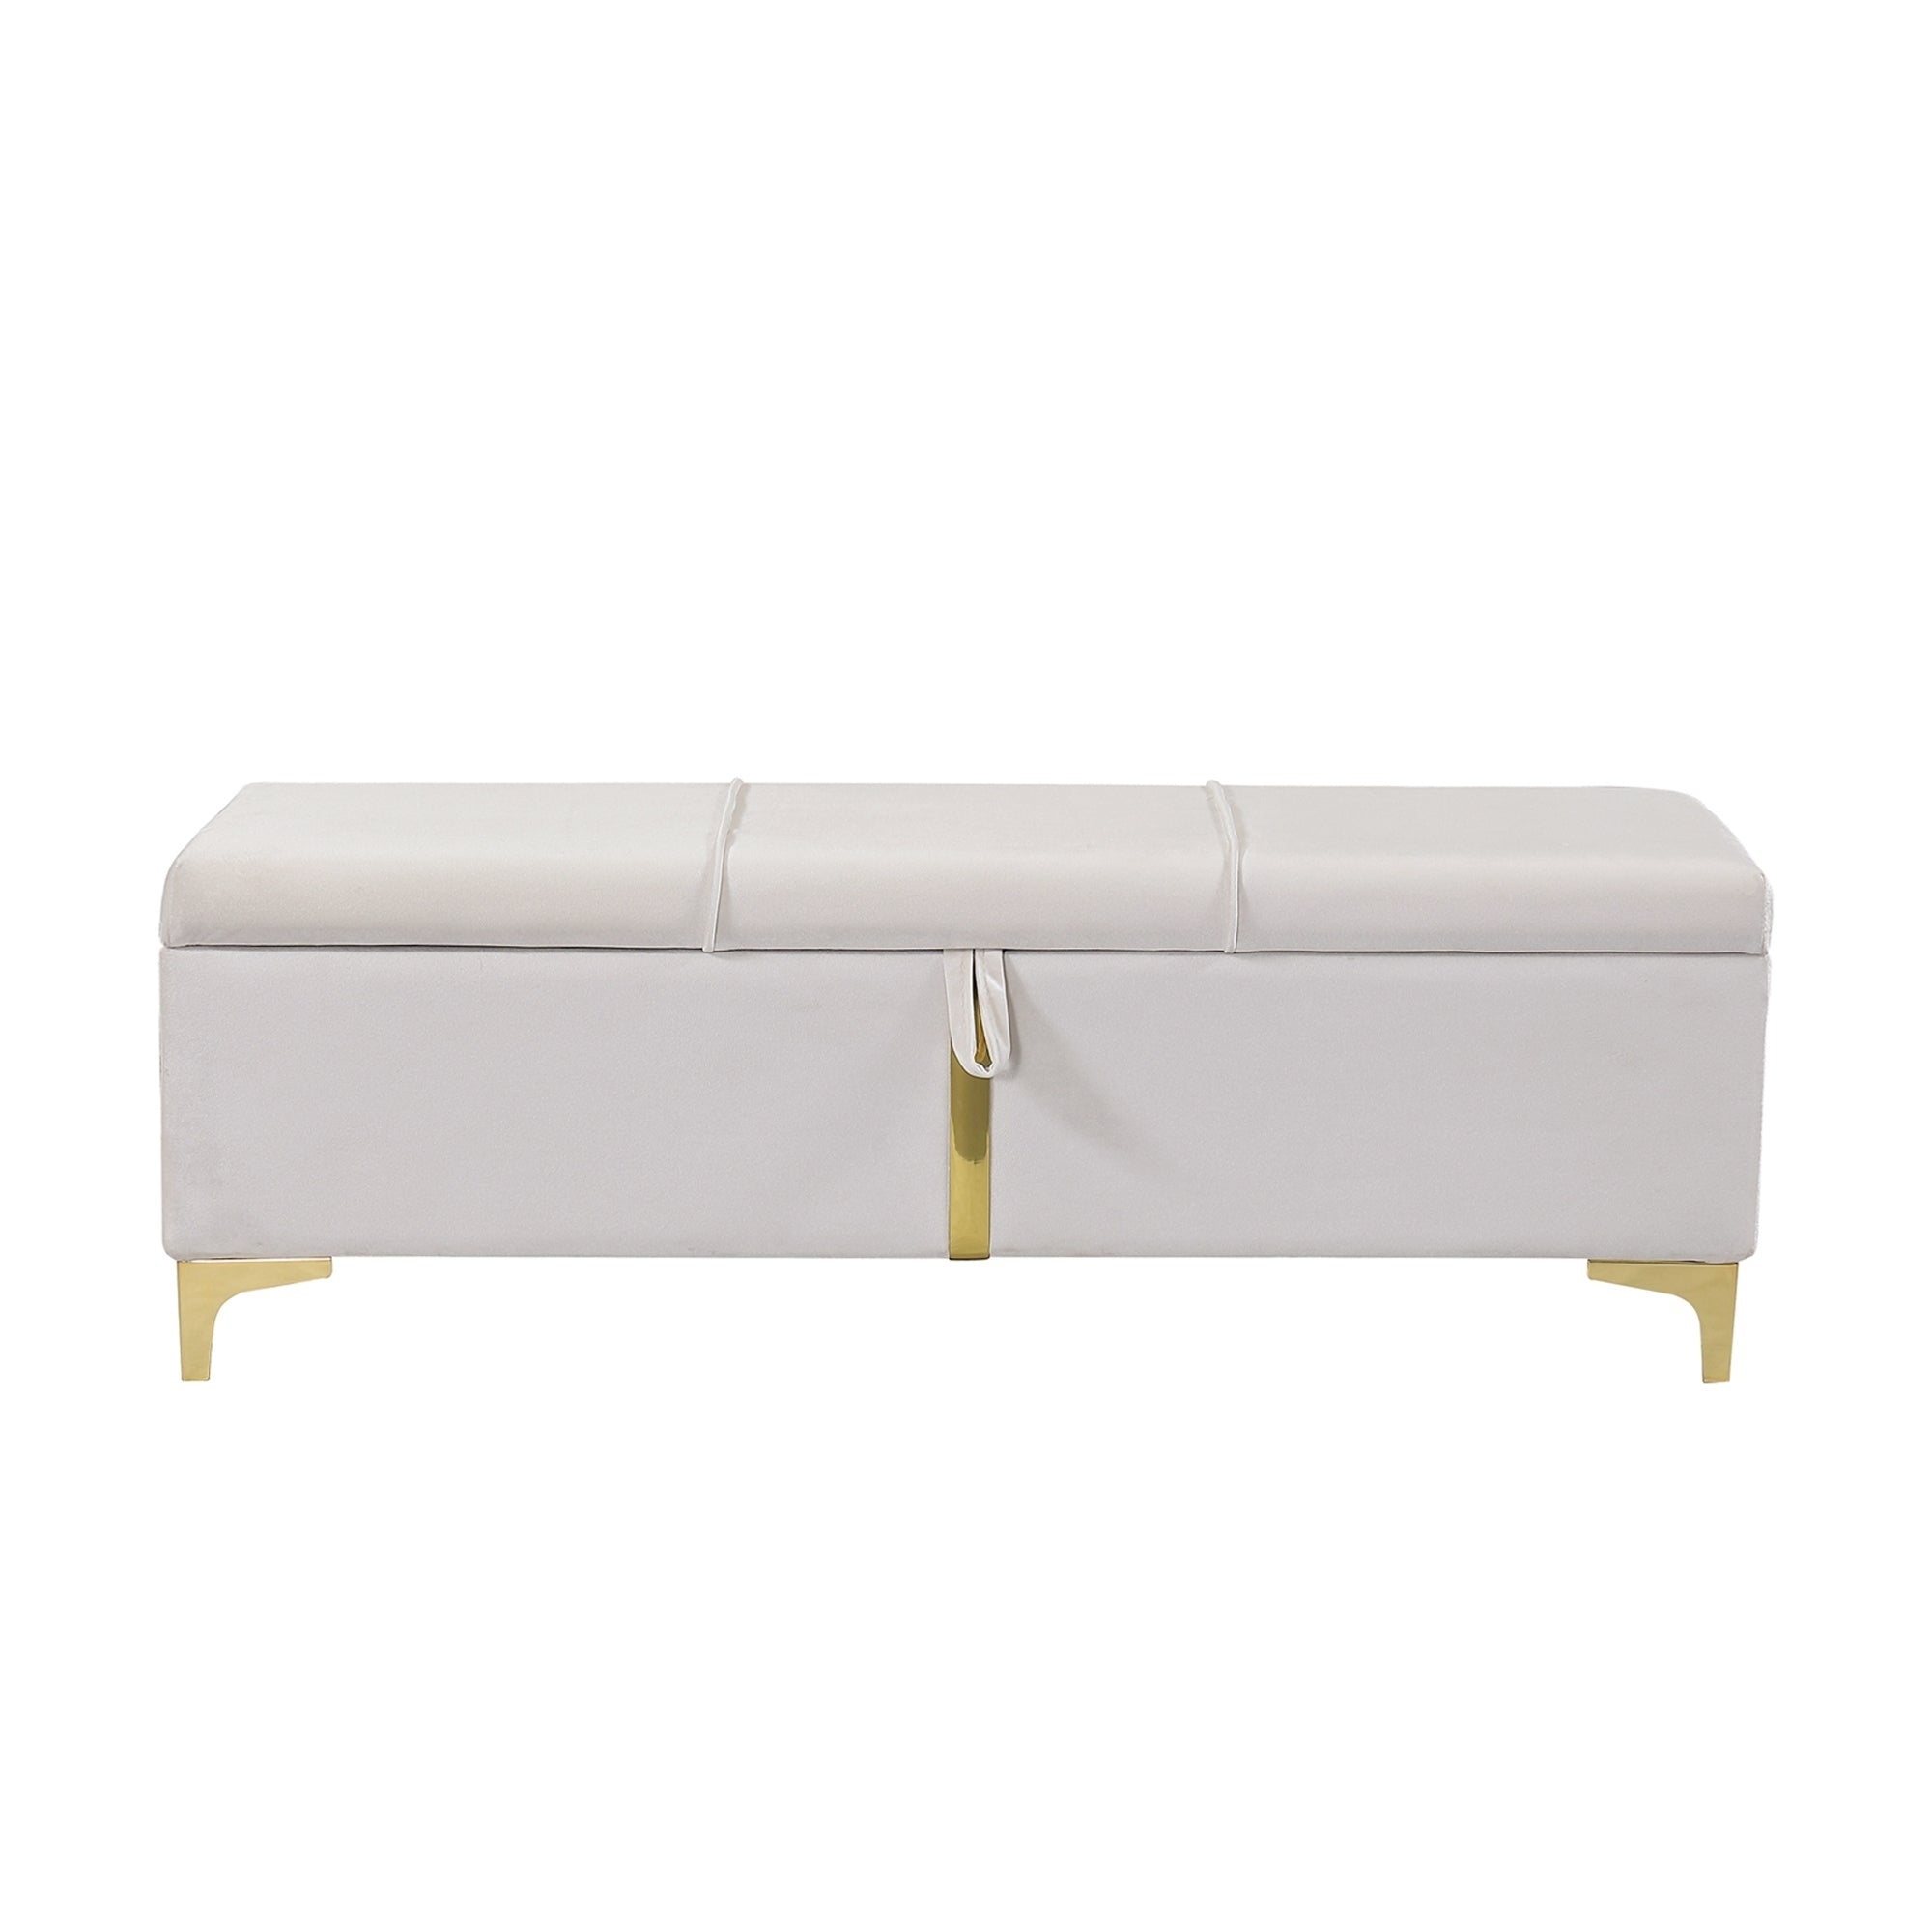 47" Velvet Upholstered Storage Ottoman Bench with Golden Strip and legs